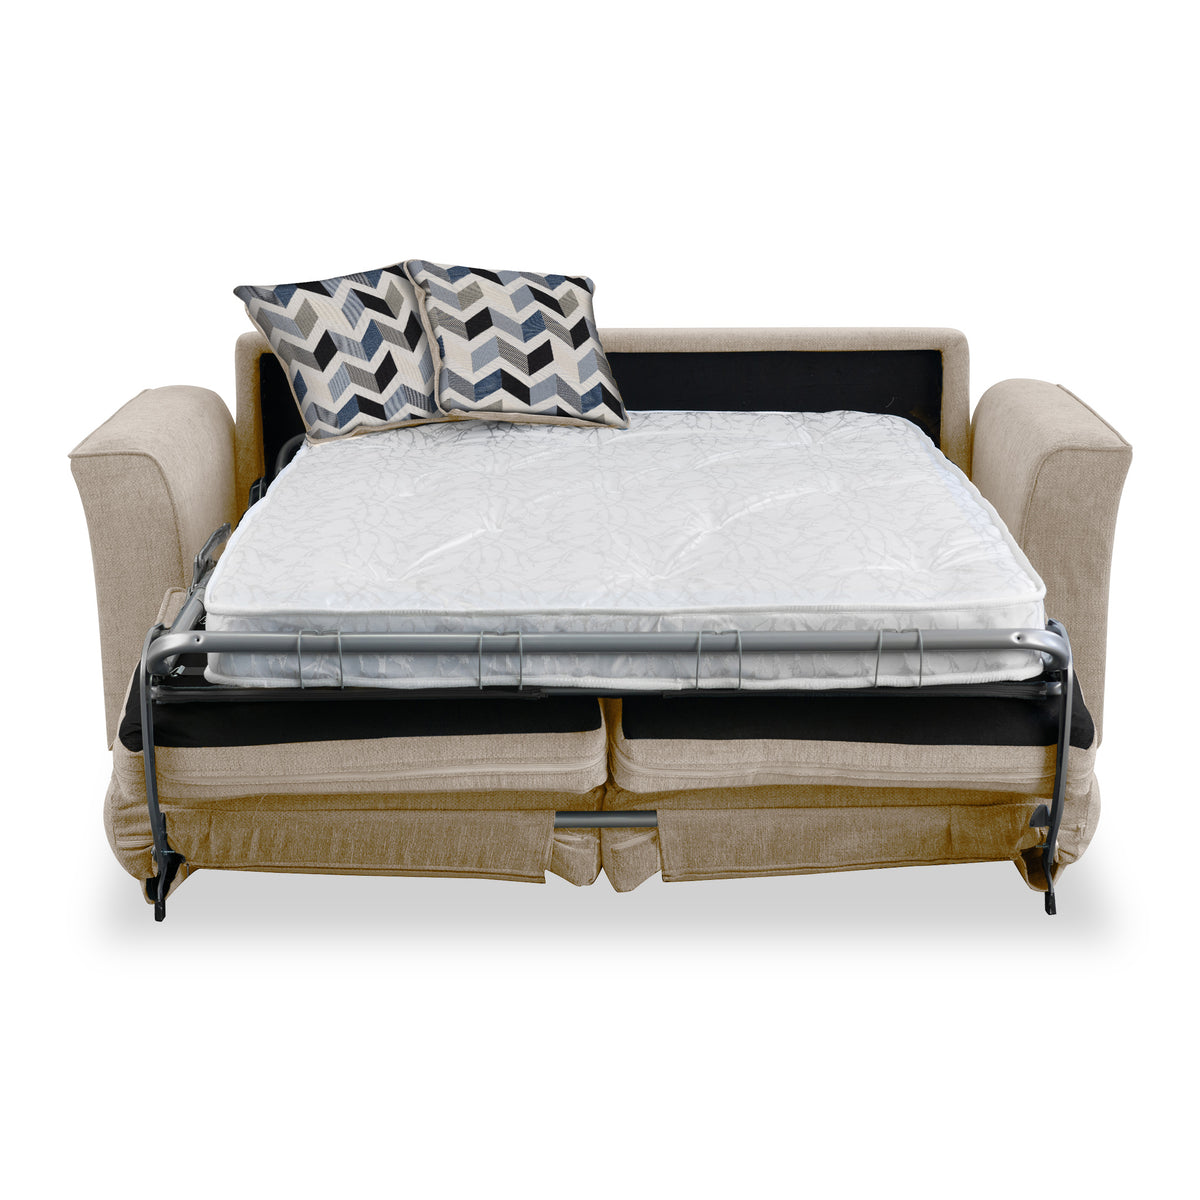 Boston 2 Seater Sofabed in Fawn with Morelisa Denim Cushions by Roseland Furniture